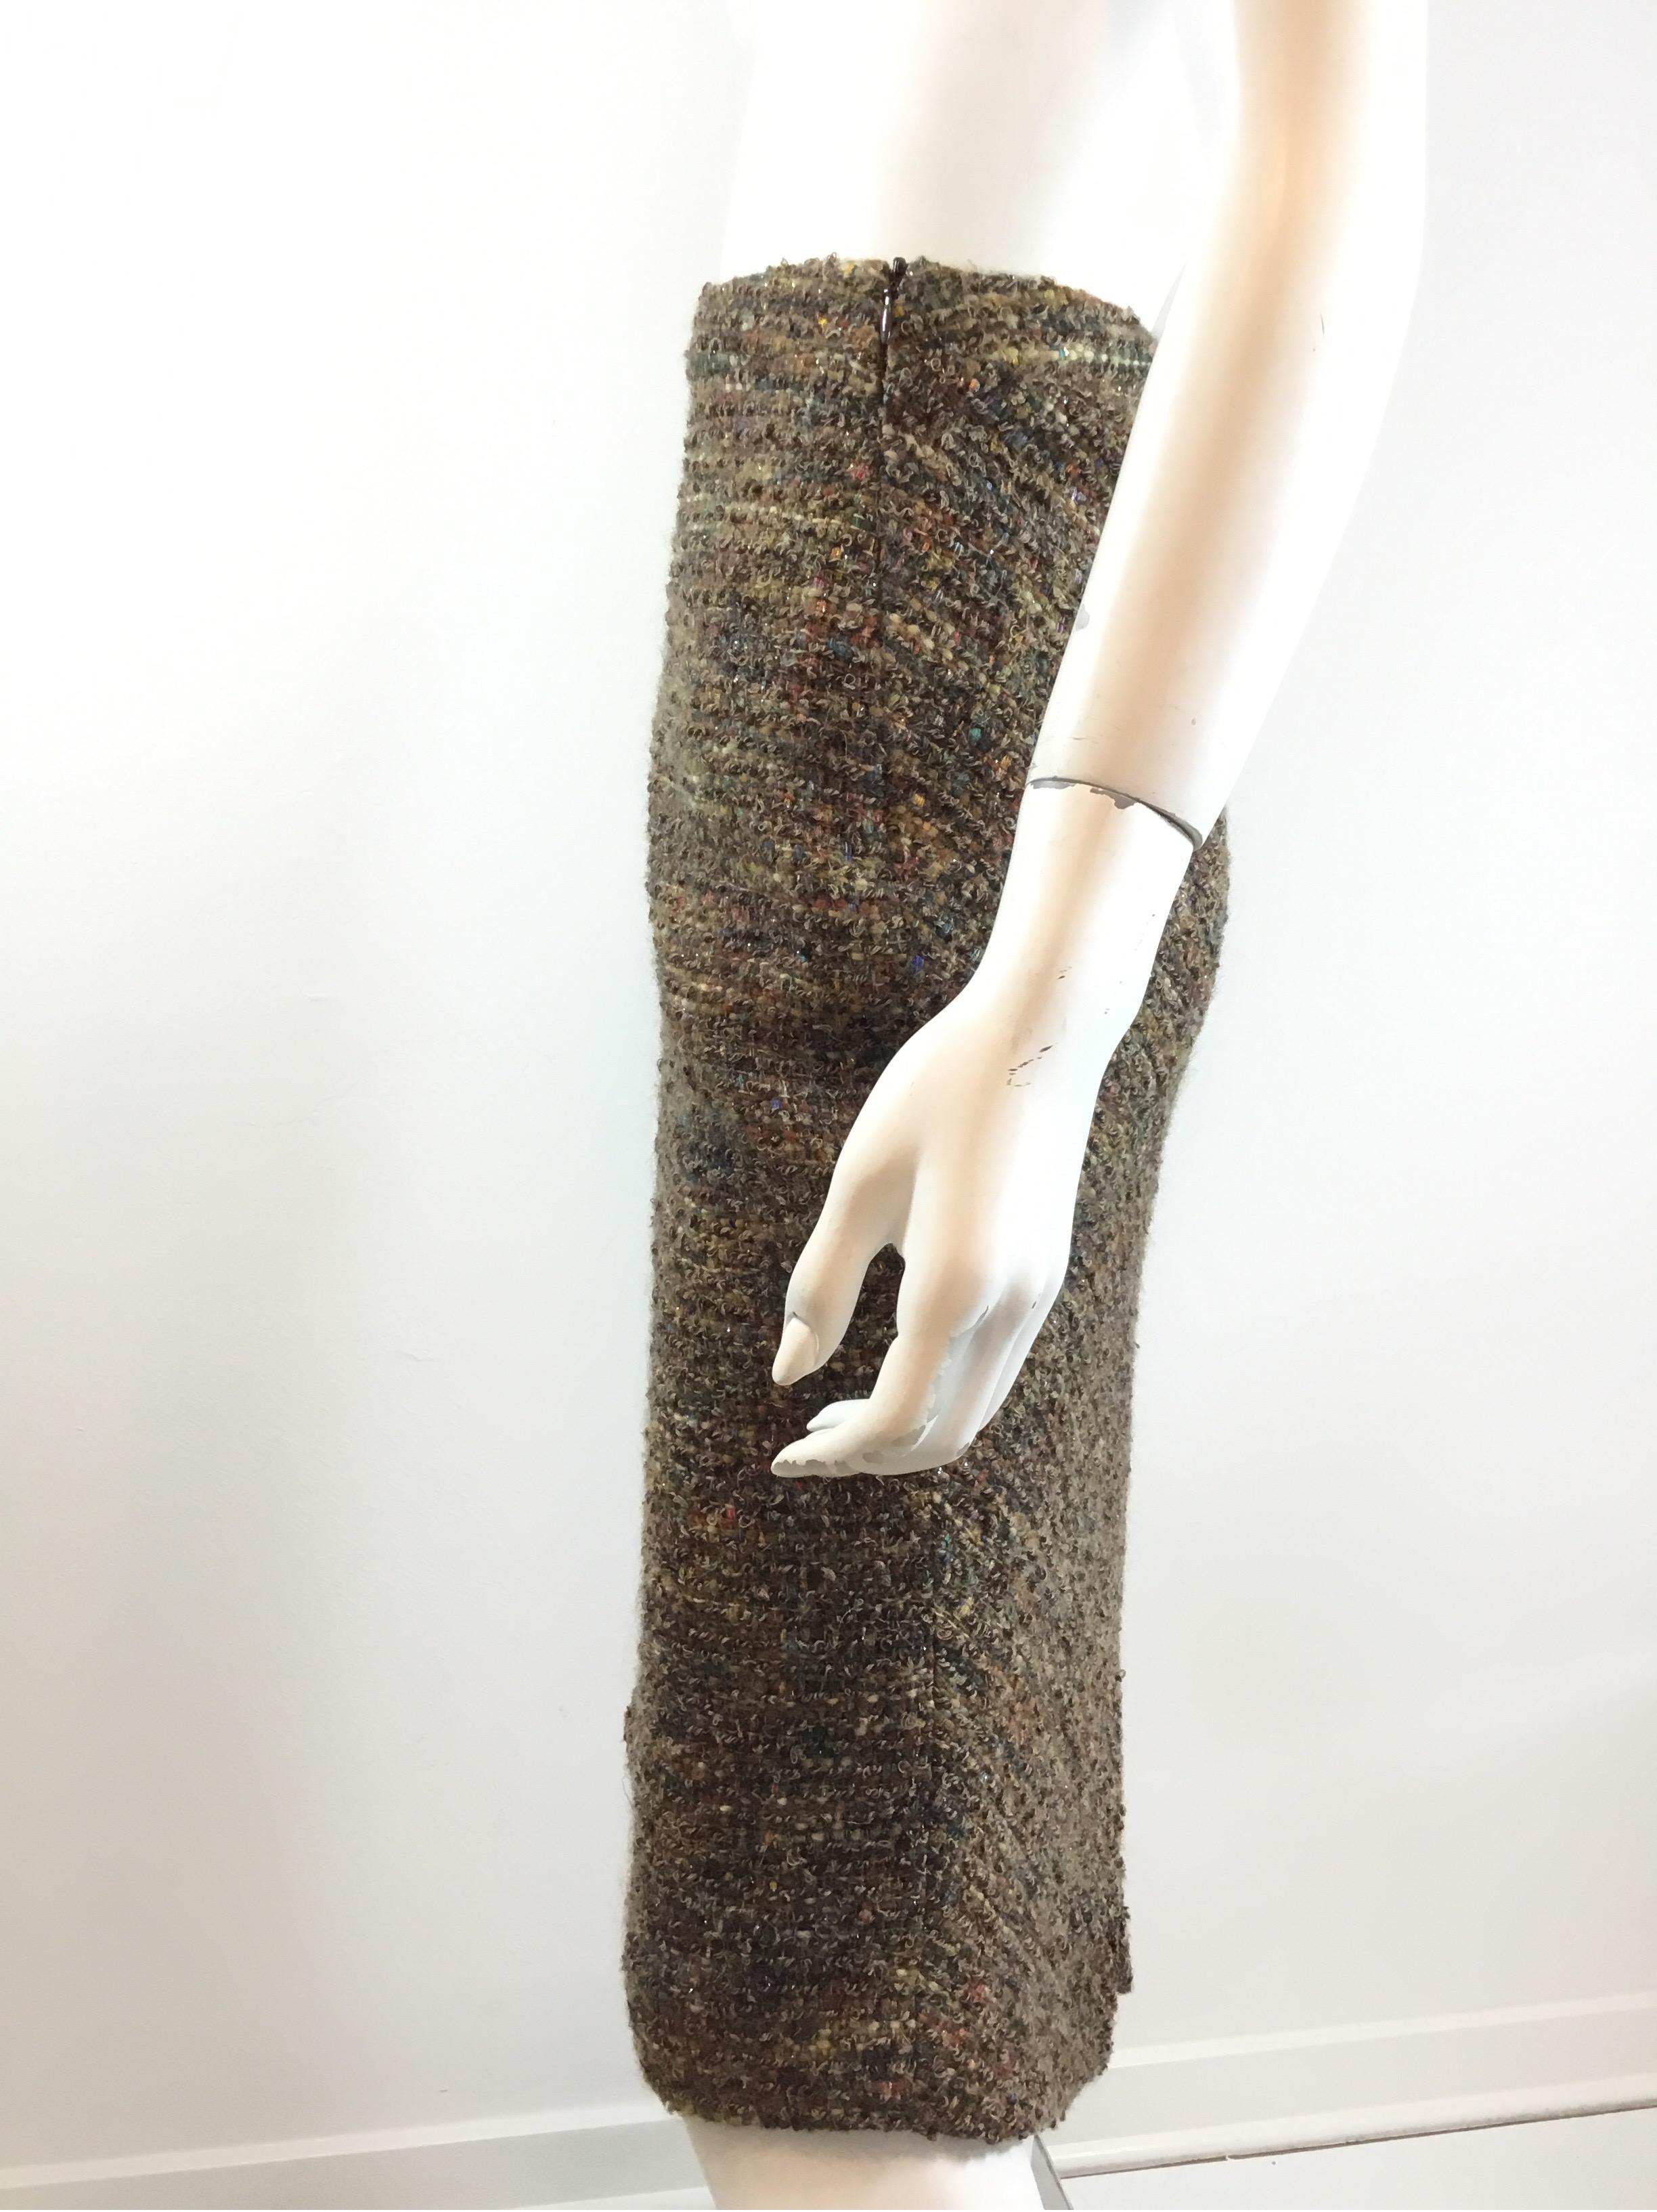 Chanel Fantasy Tweed Skirt with Fishtail Hem In Excellent Condition For Sale In Carmel, CA